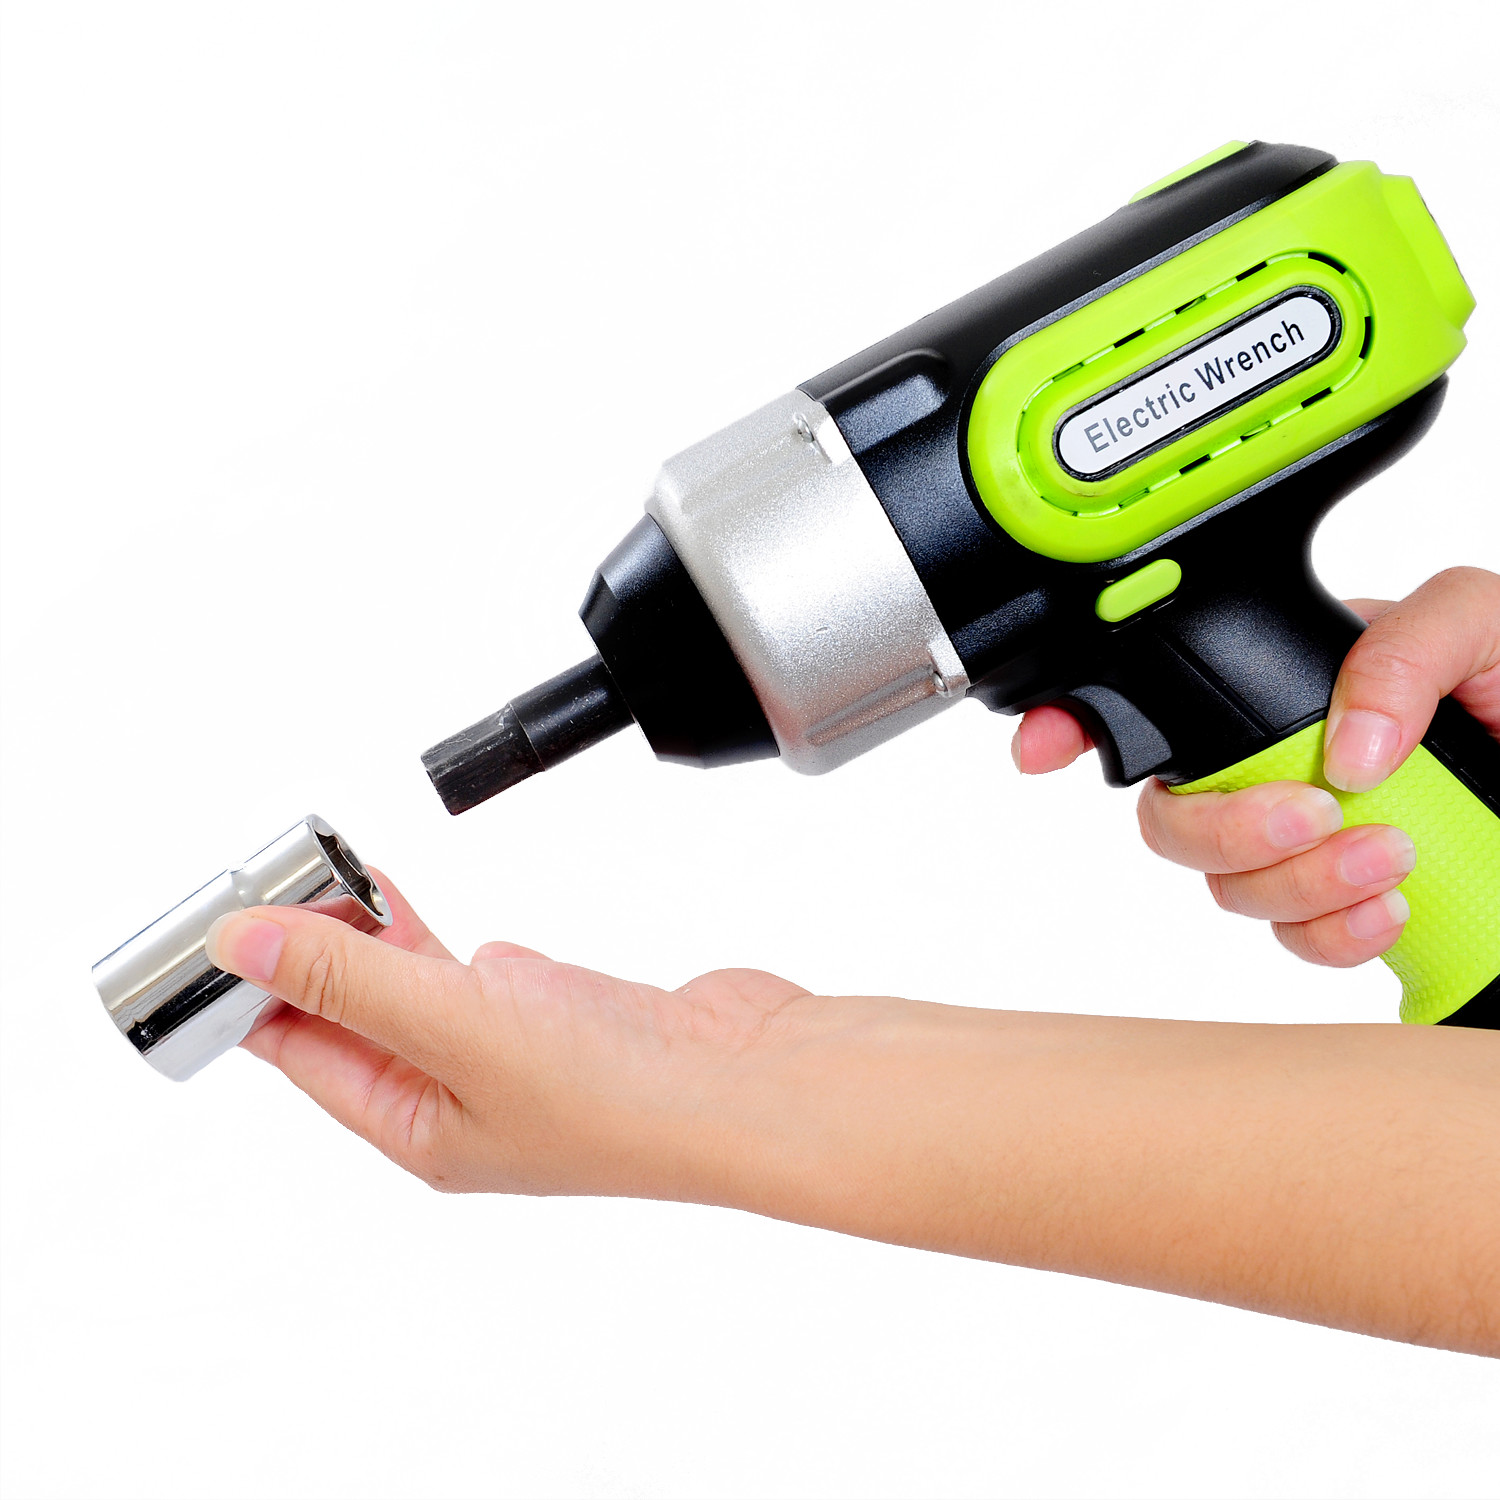 420N.m 1/2" High Strength Motor DC12V Electric Impact Wrench with 4 Sleeve sizes 17/19/21/23cm